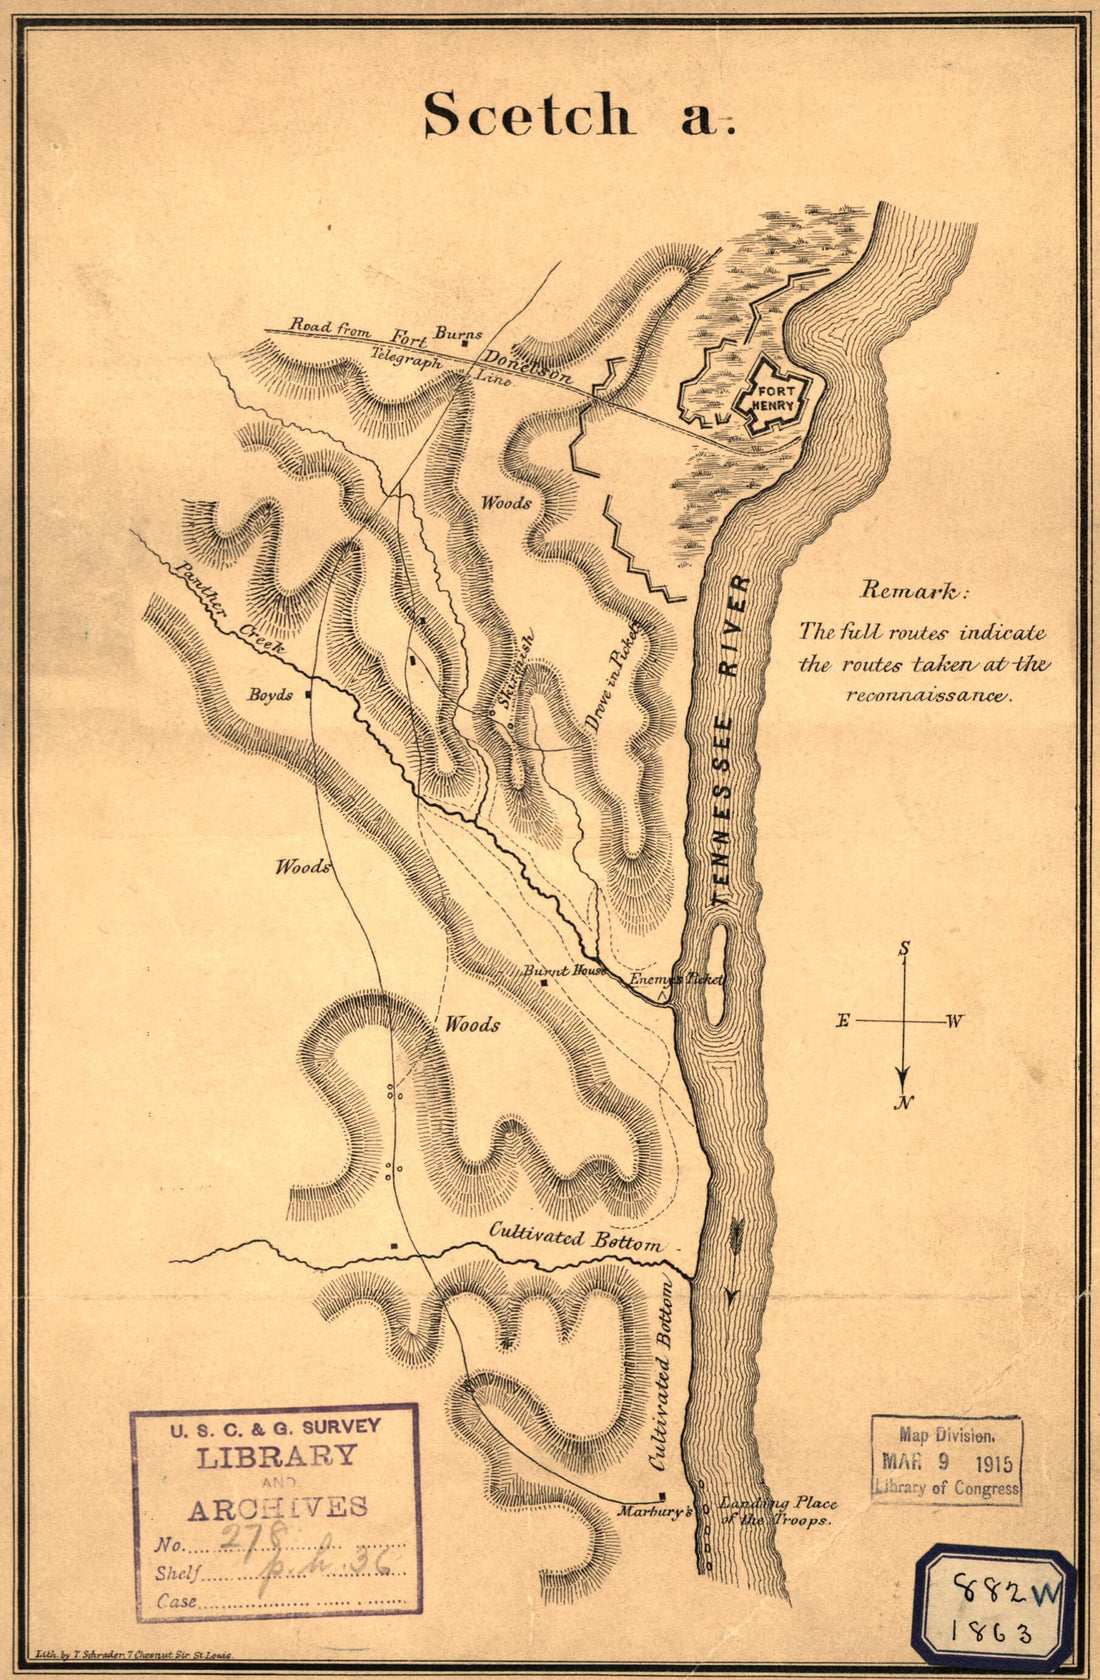 This old map of Map of Fort Henry, Tennessee, and Environs from 1863 was created by Julius Pitzman, T. Schrader in 1863